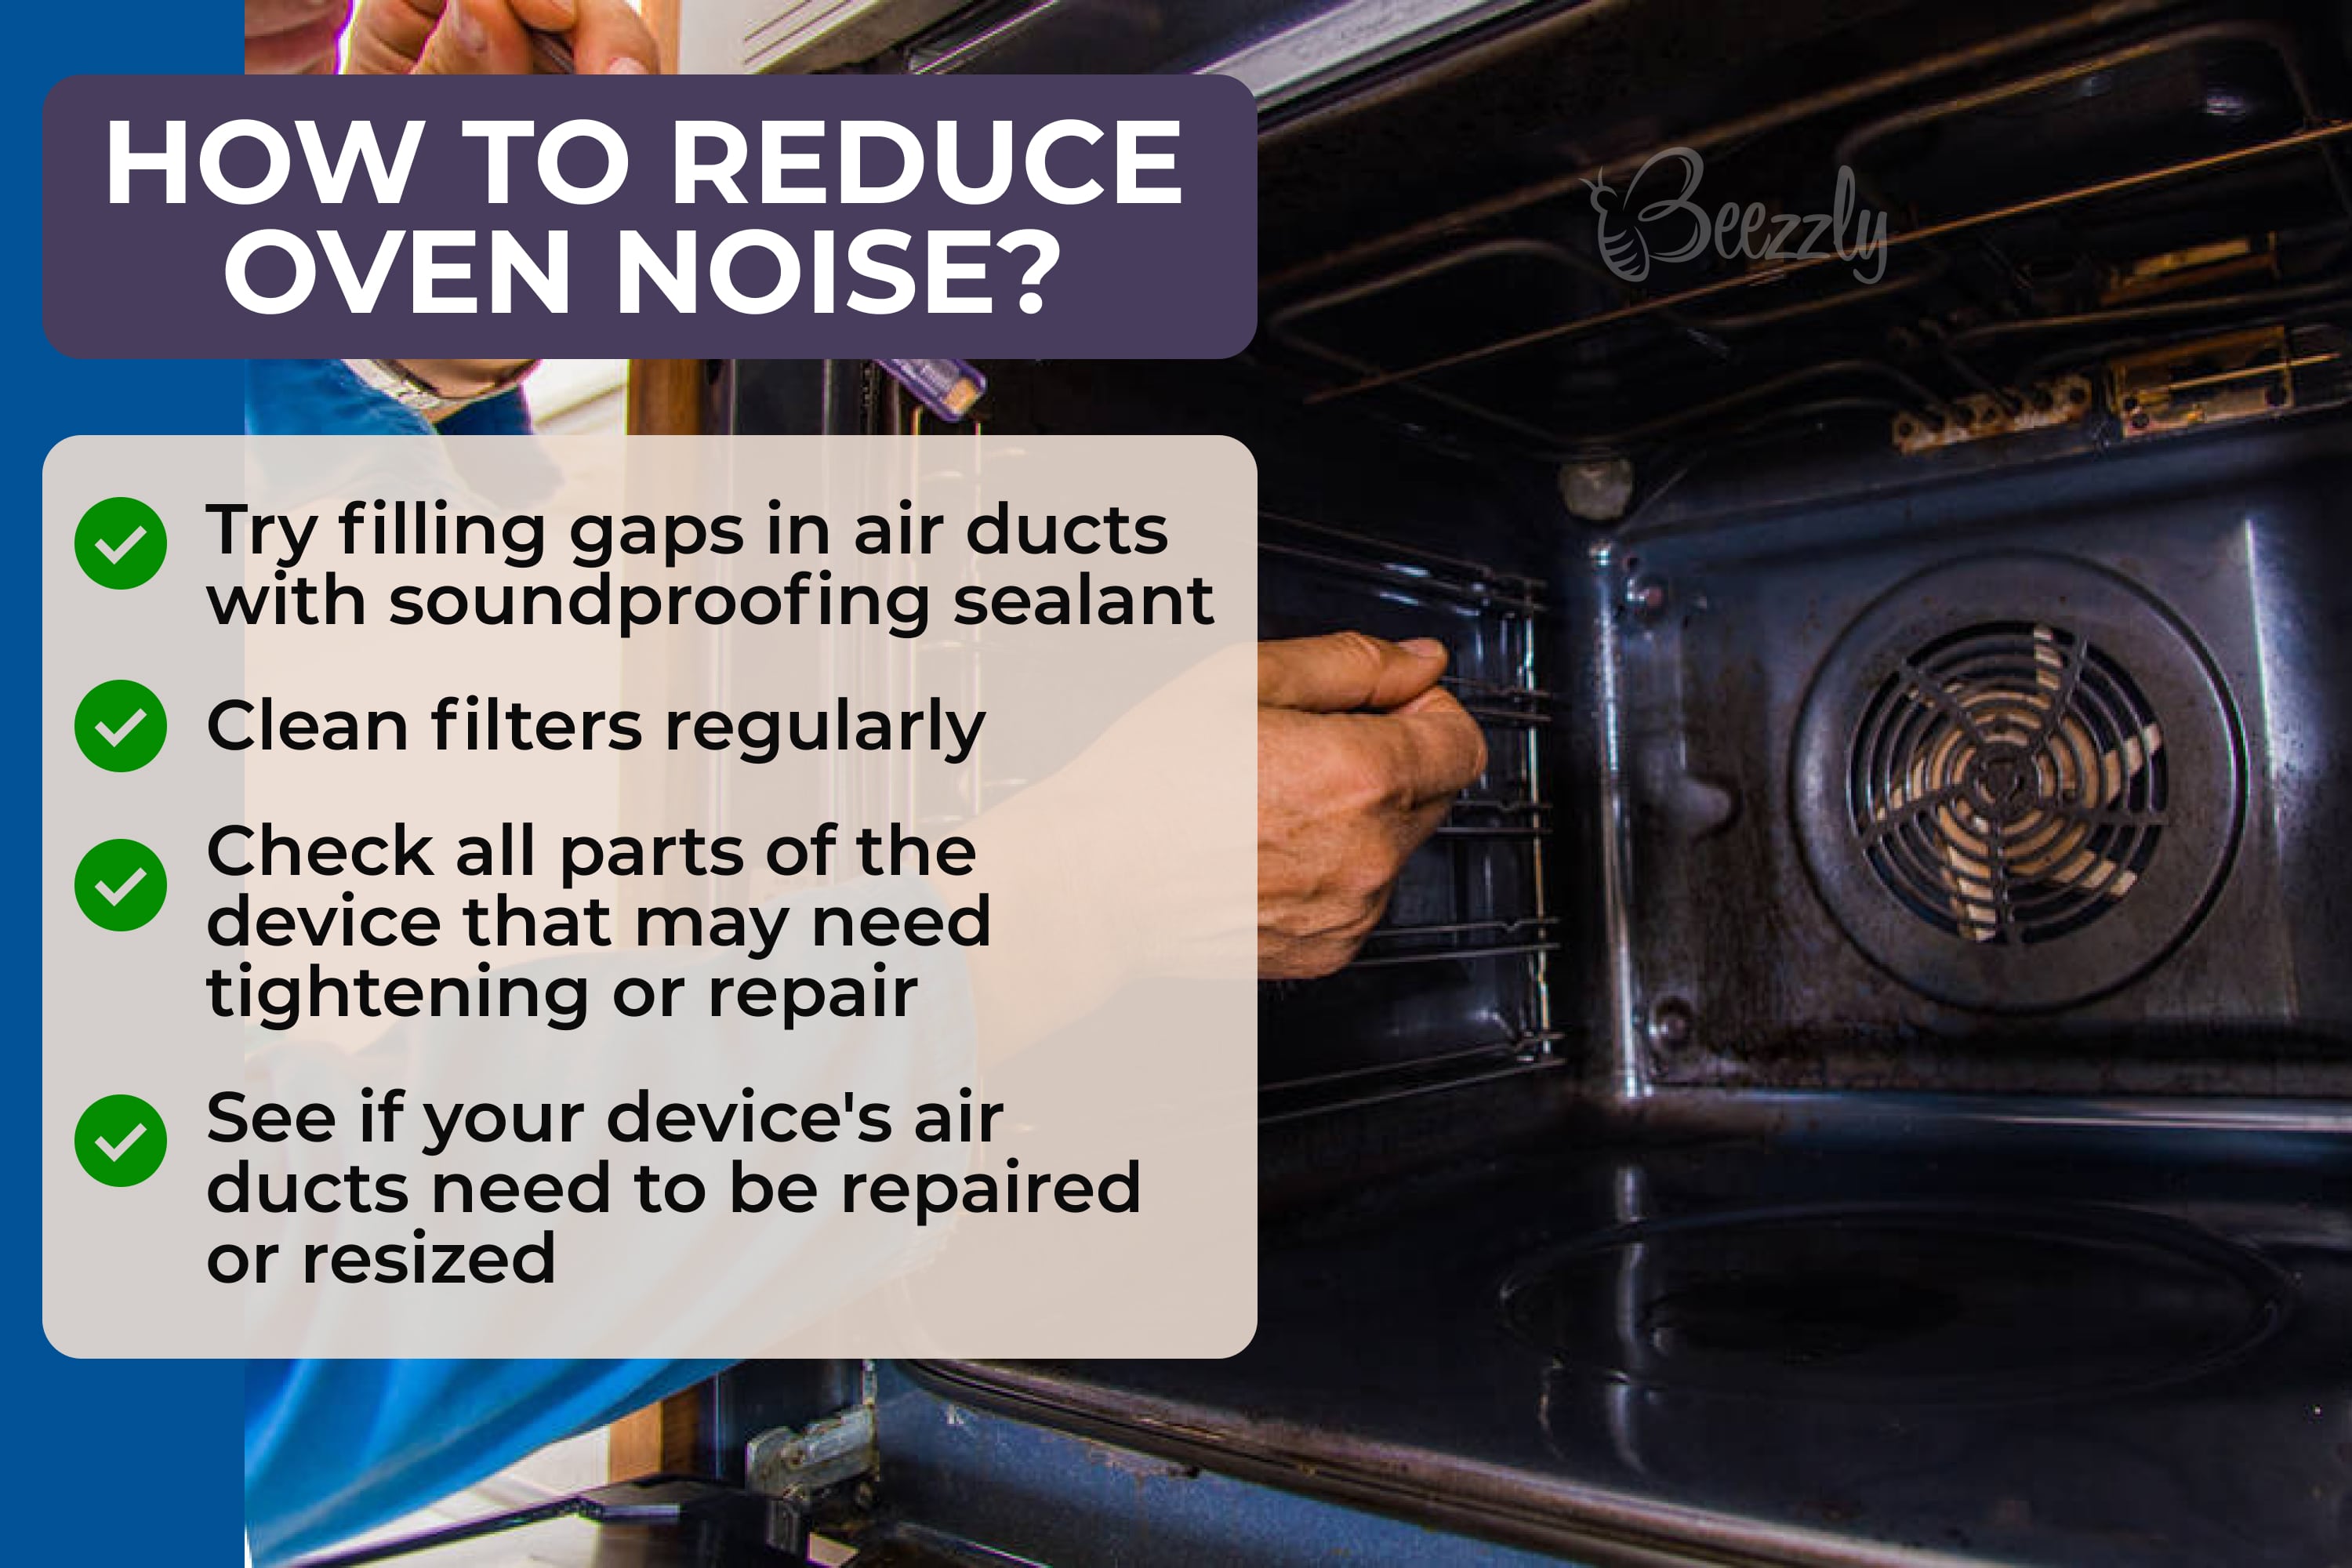 How to reduce oven noise